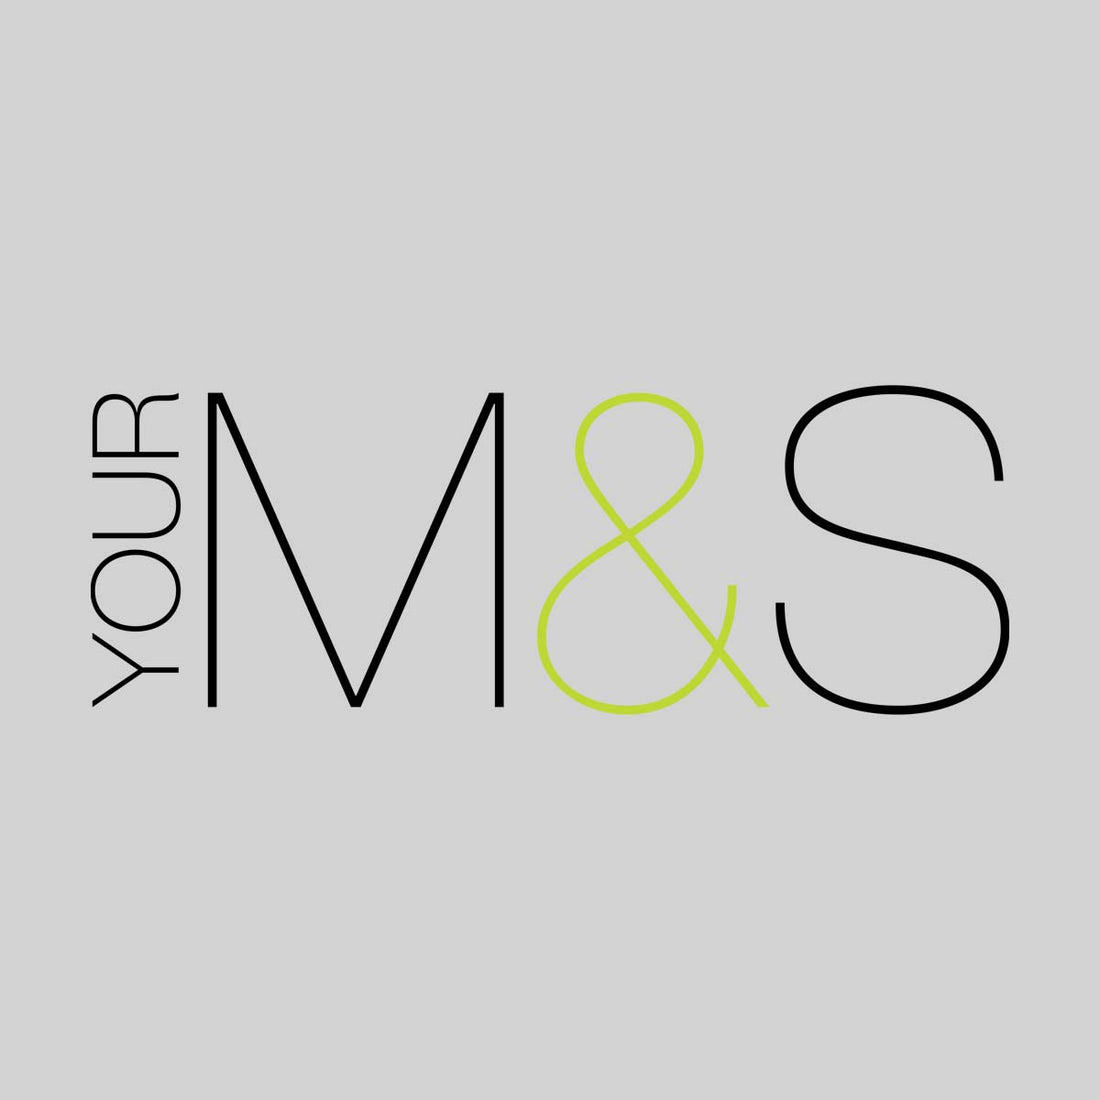 Who Are Marks & Spencer?